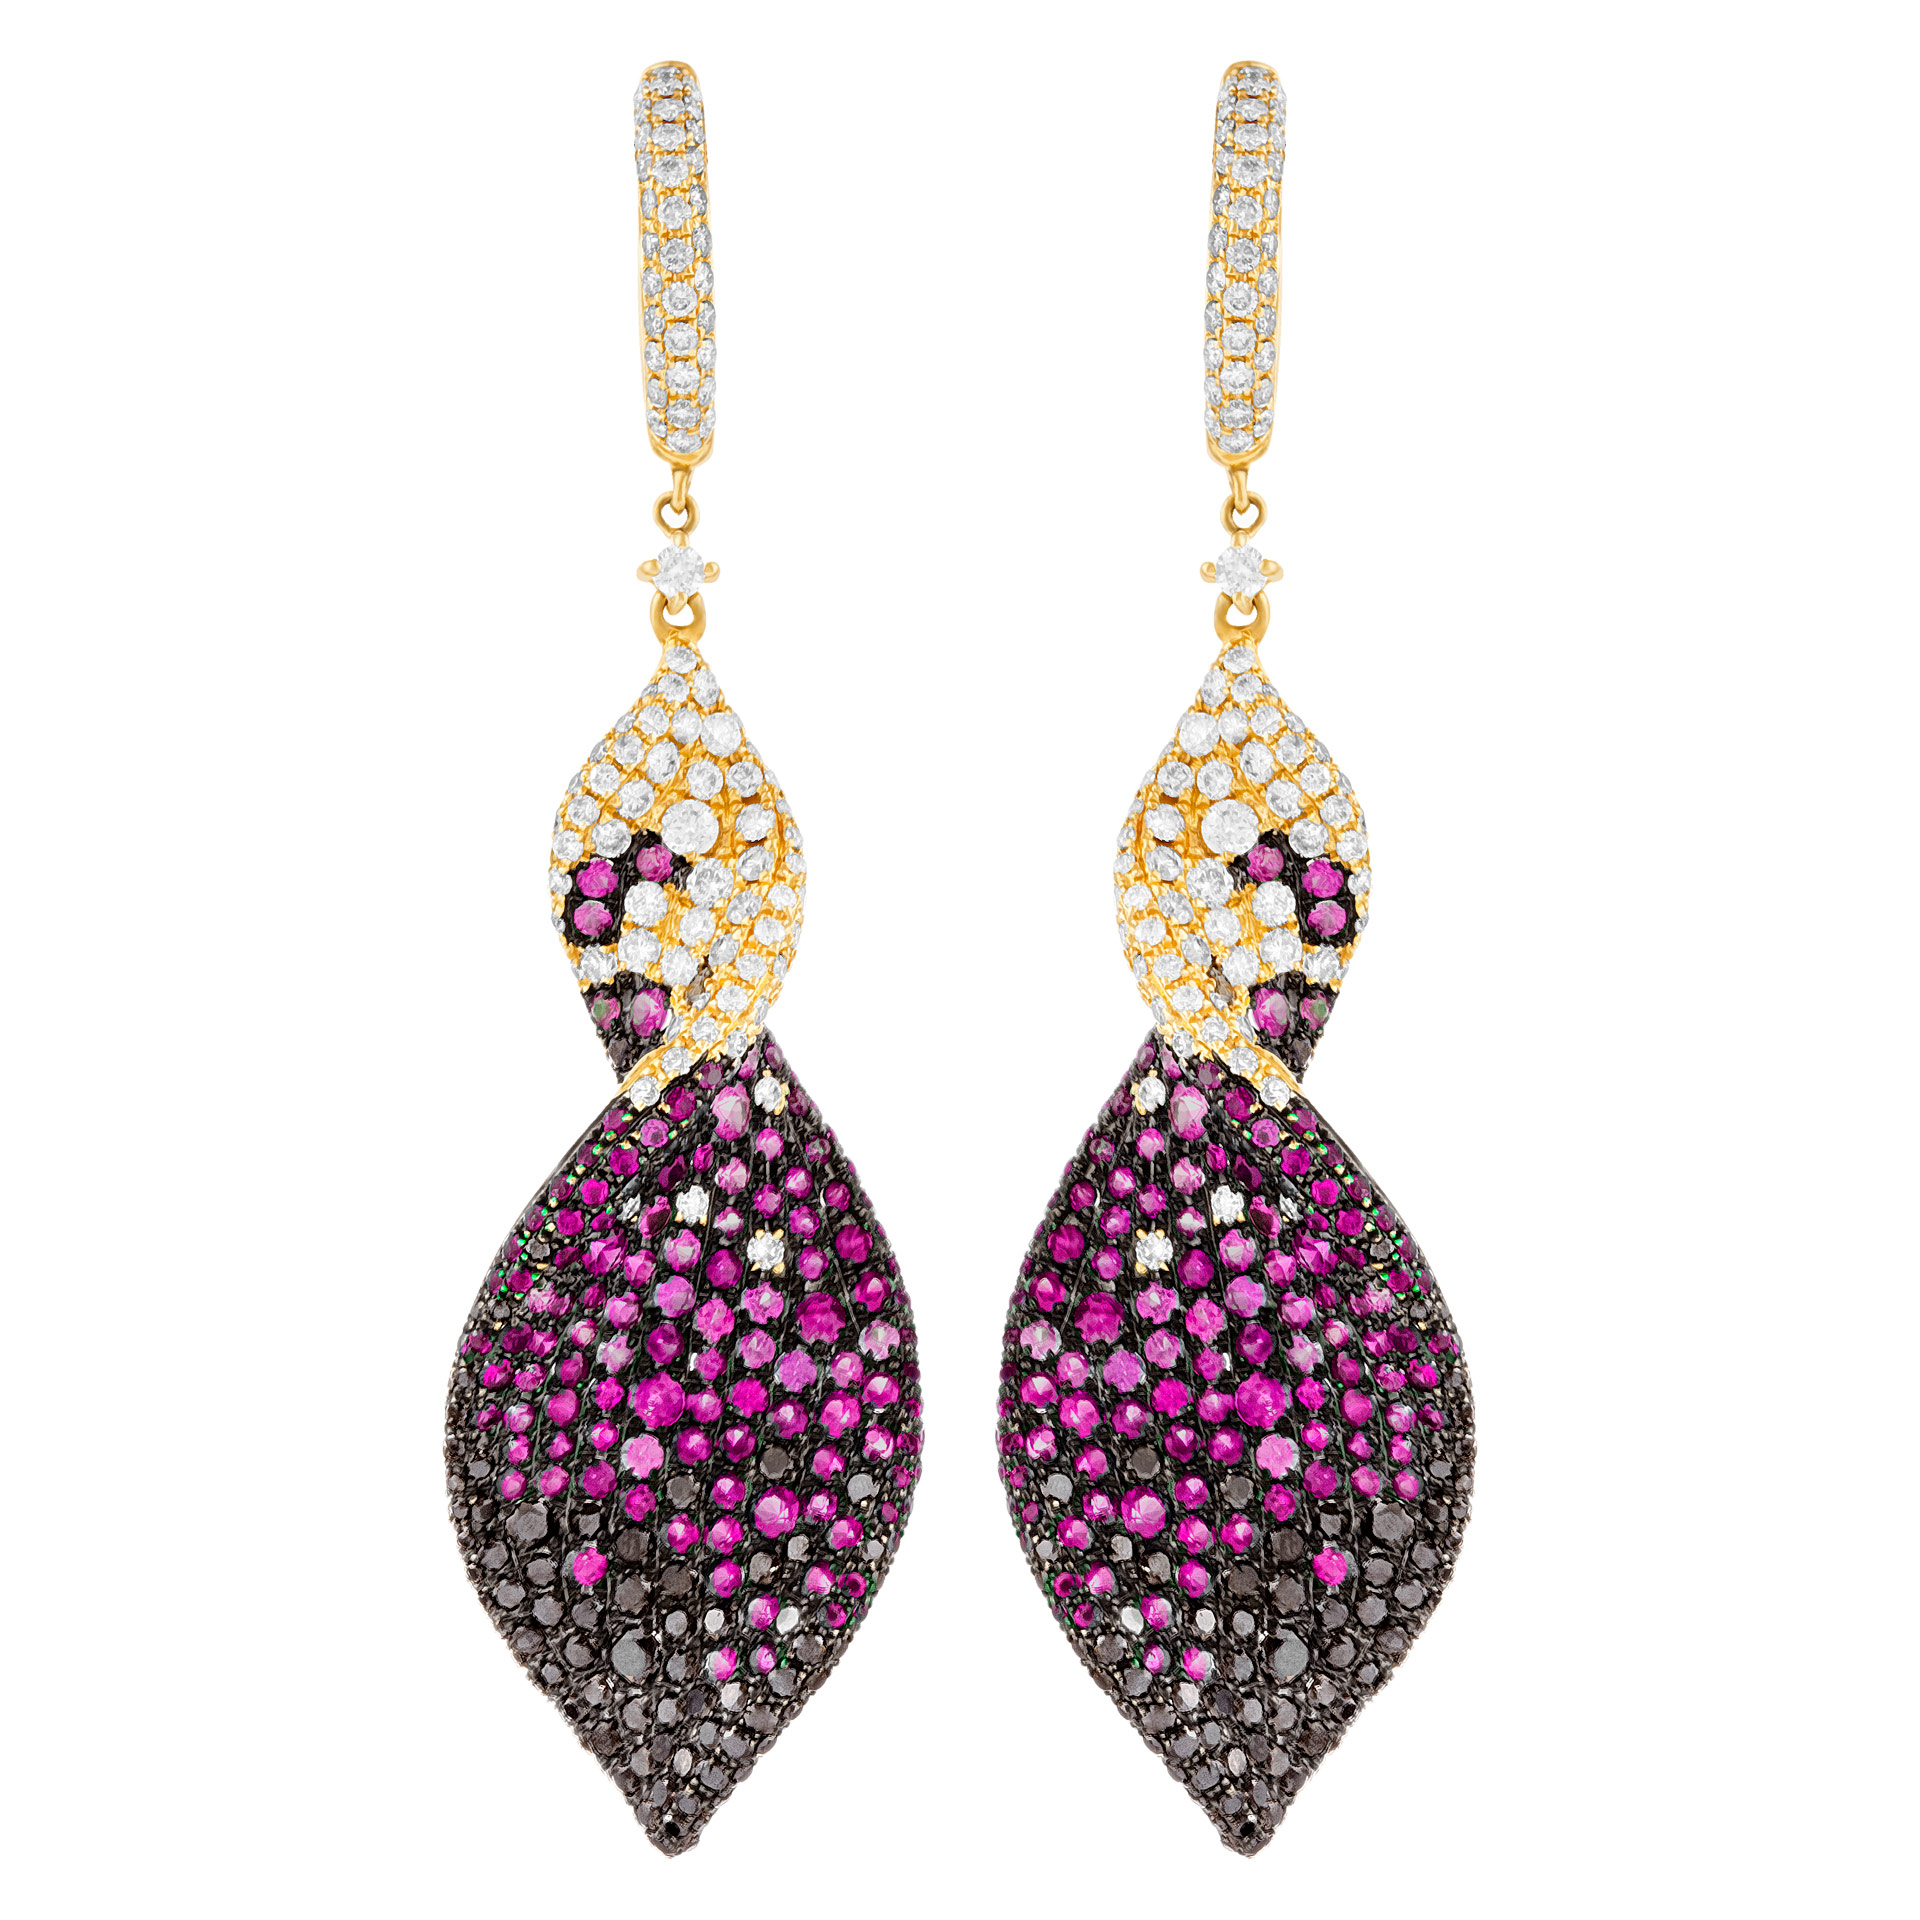 Twisted ruby, sapphire & diamond earrings in 18k with PVD image 1